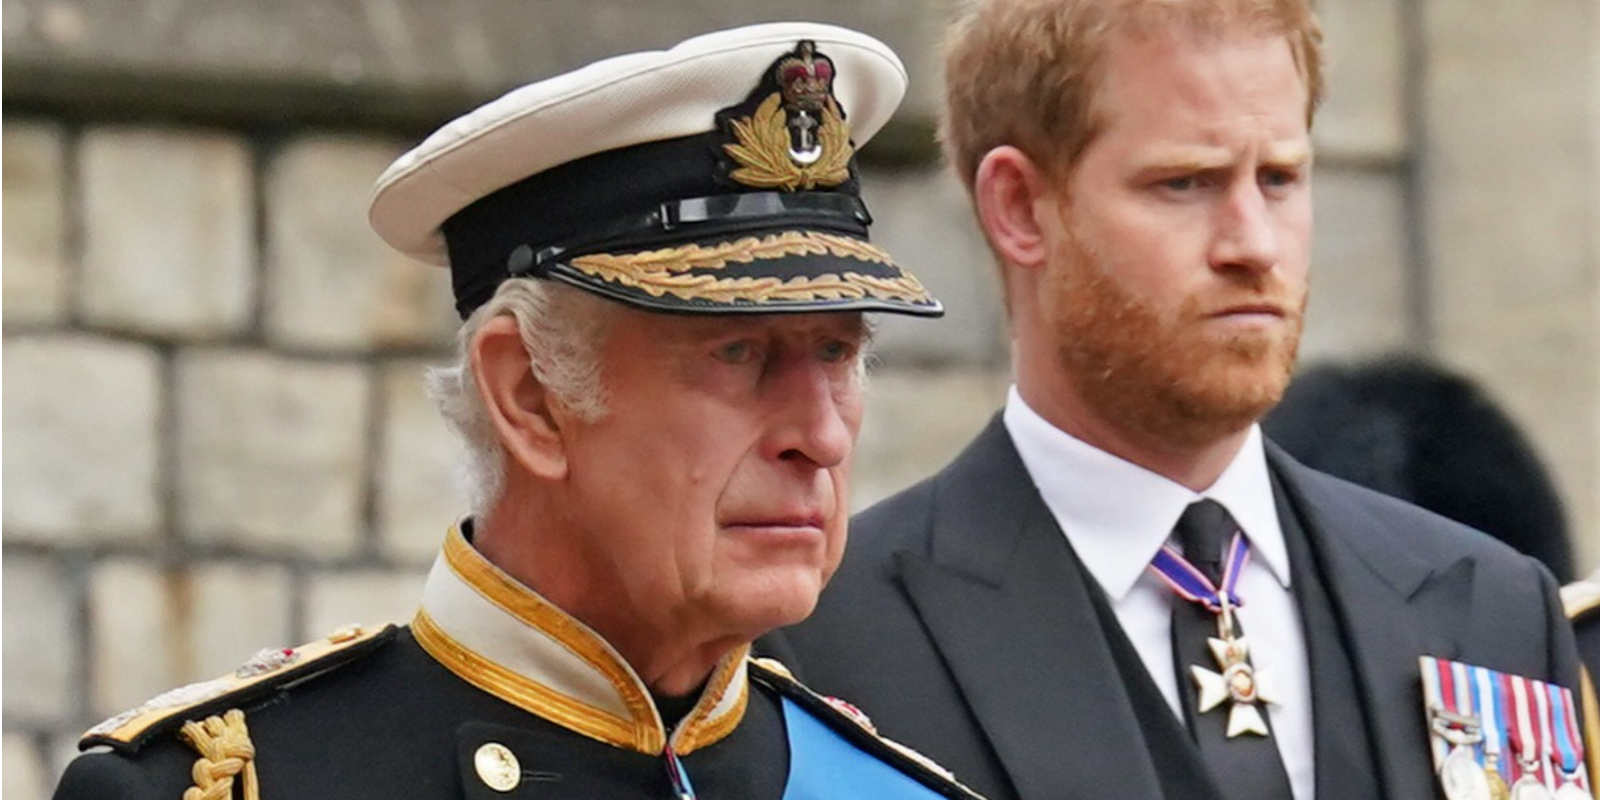 King Charles III and Prince Harry at Queen Elizabeth II's funeral procession.